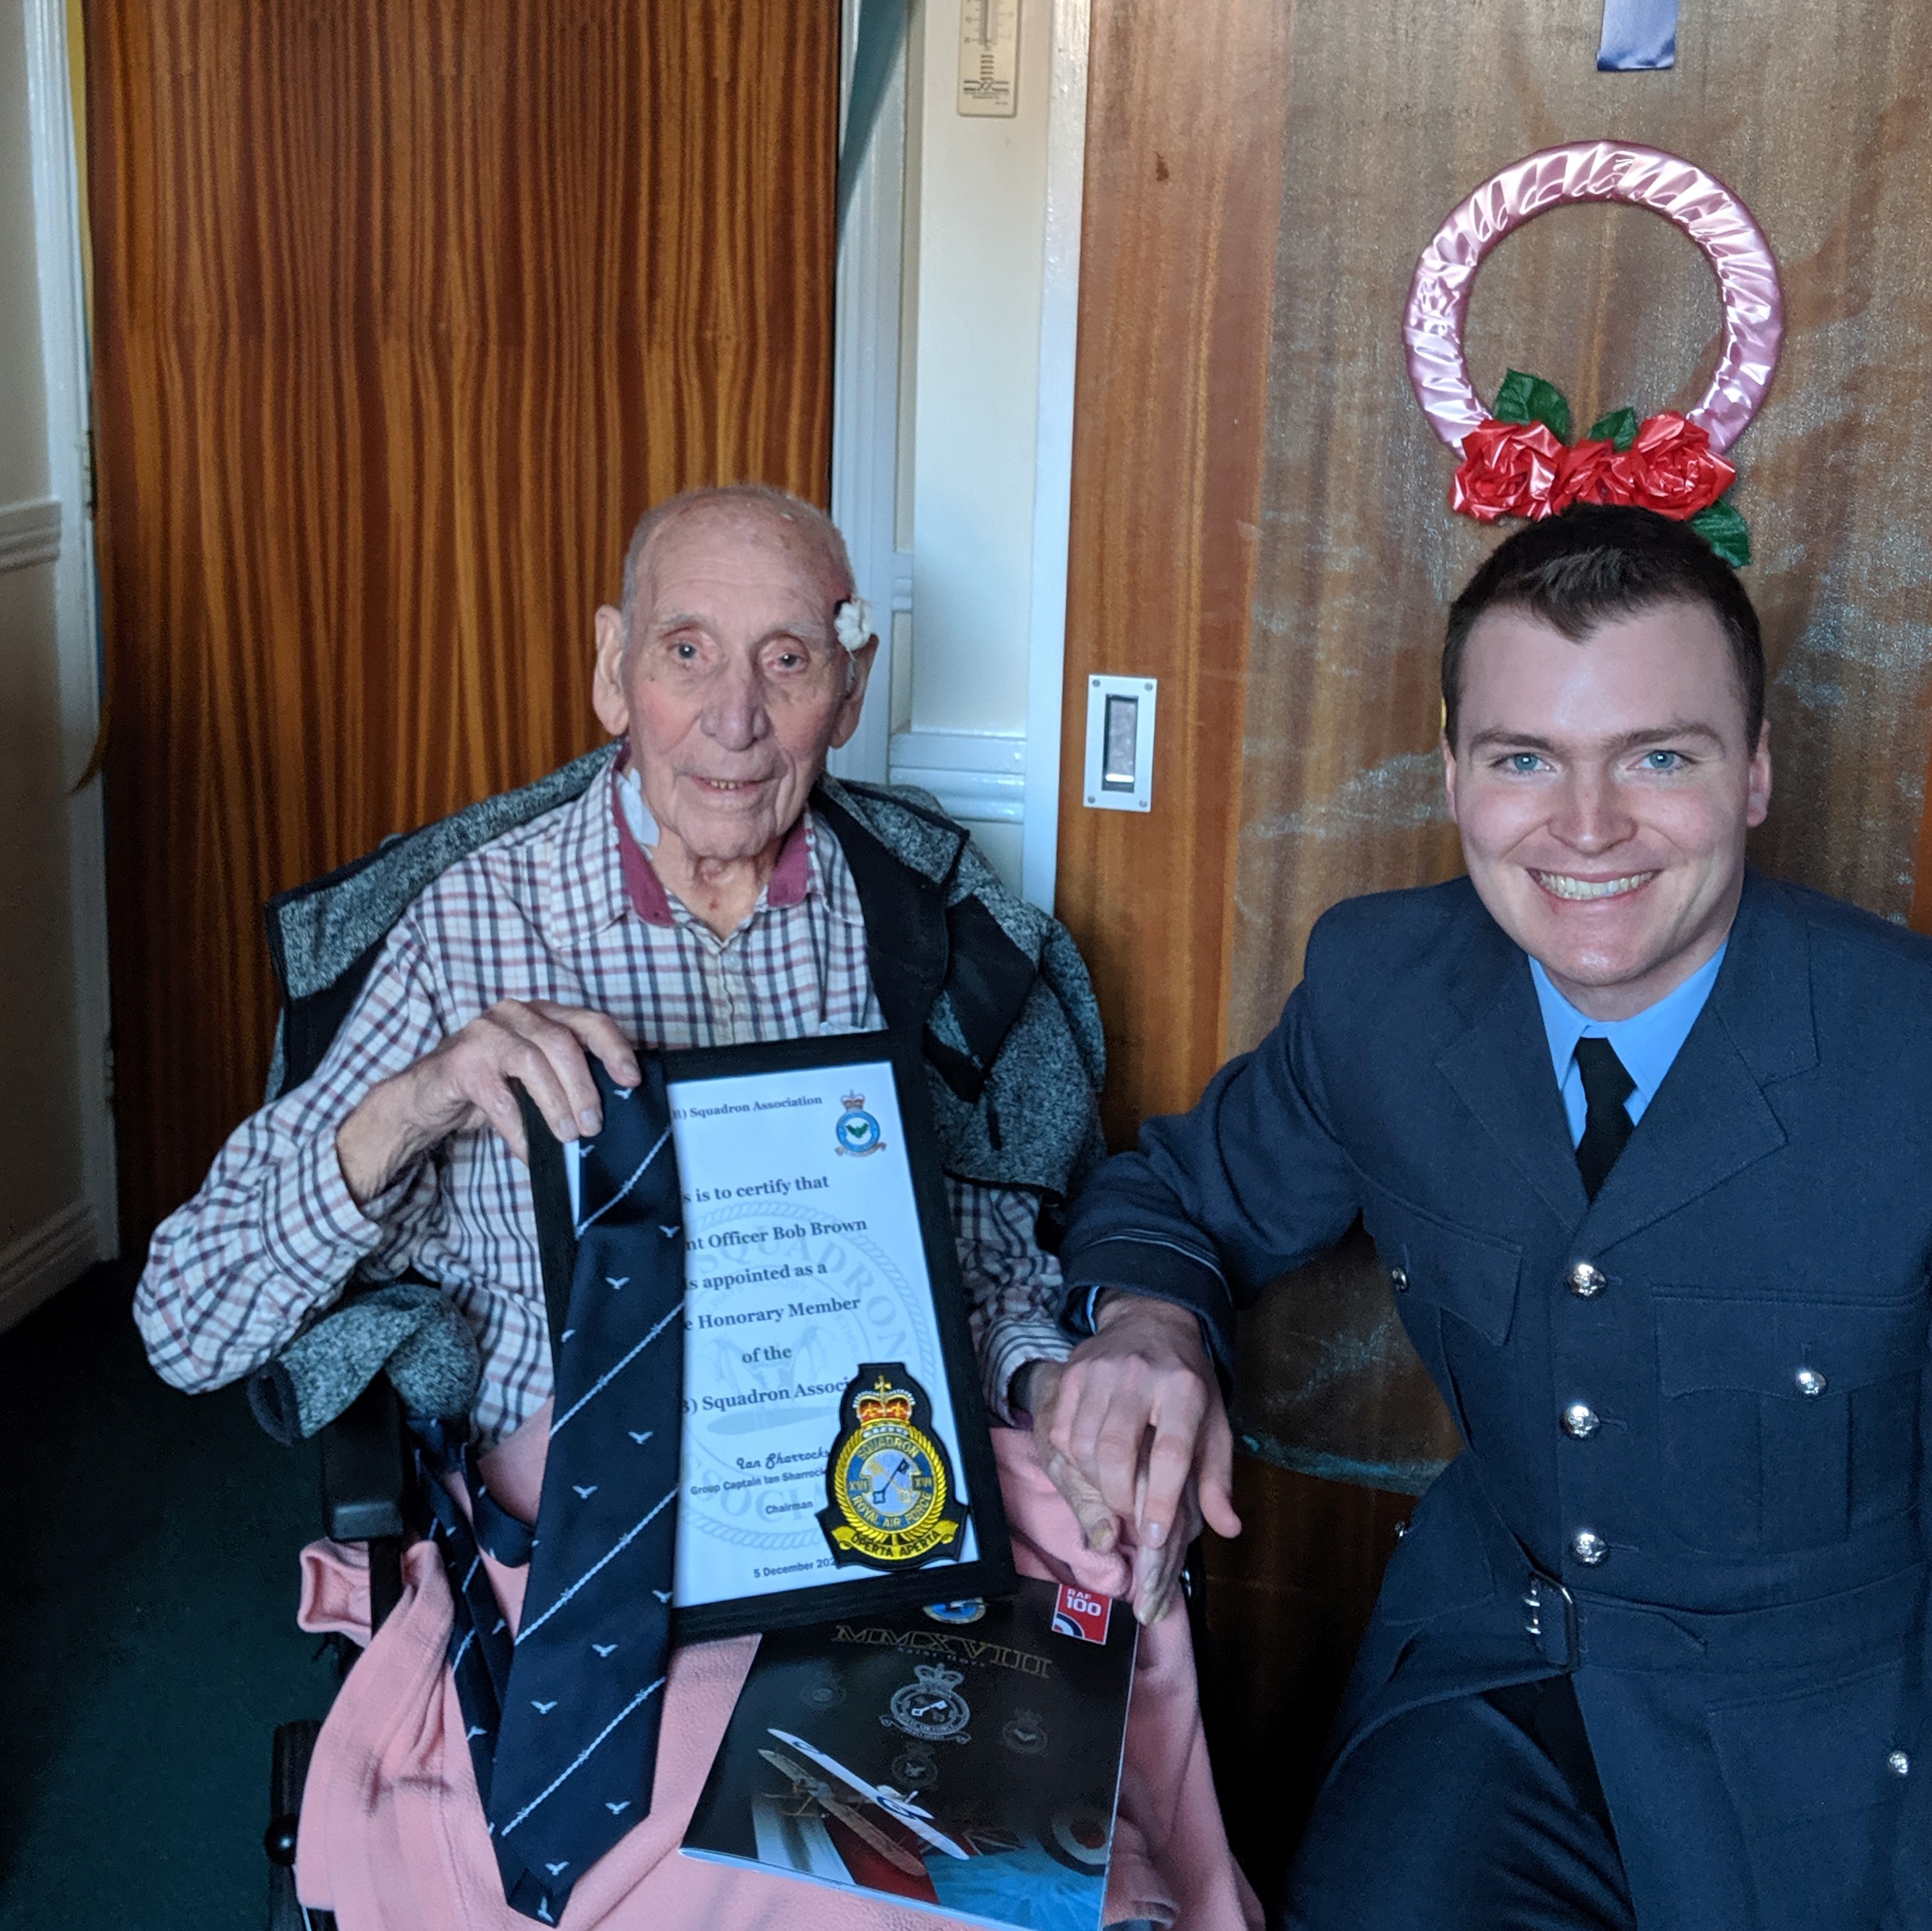 Image shows RAF veteran holding a certificate and a tie while sitting next to a RAF aviator.